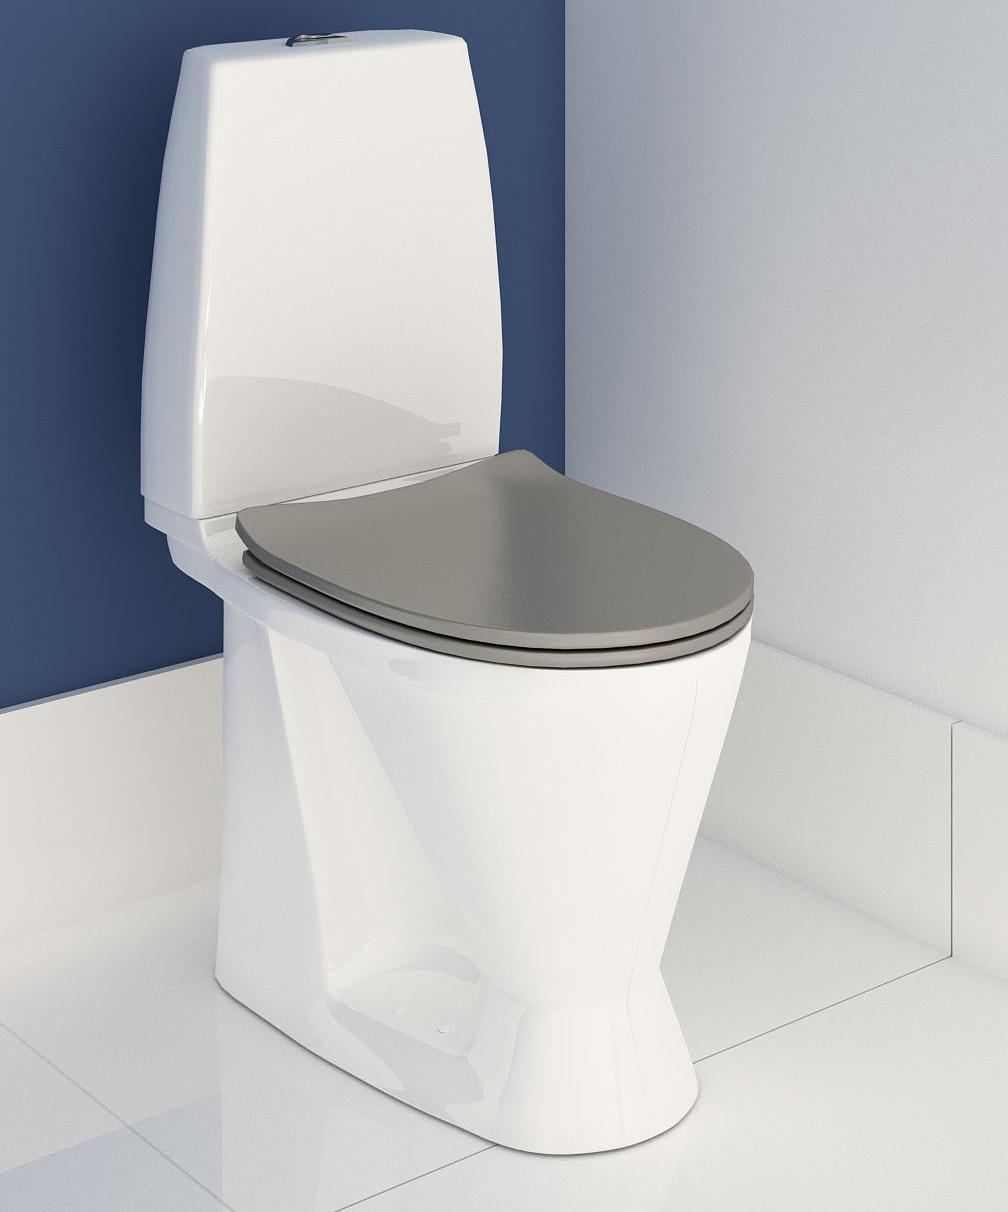 Ifo Sign Toilet Increased Height - S Trap Free standing toilet with 460mm seat height for those who cannot easily sit down or stand up - especially for hip and knee support.